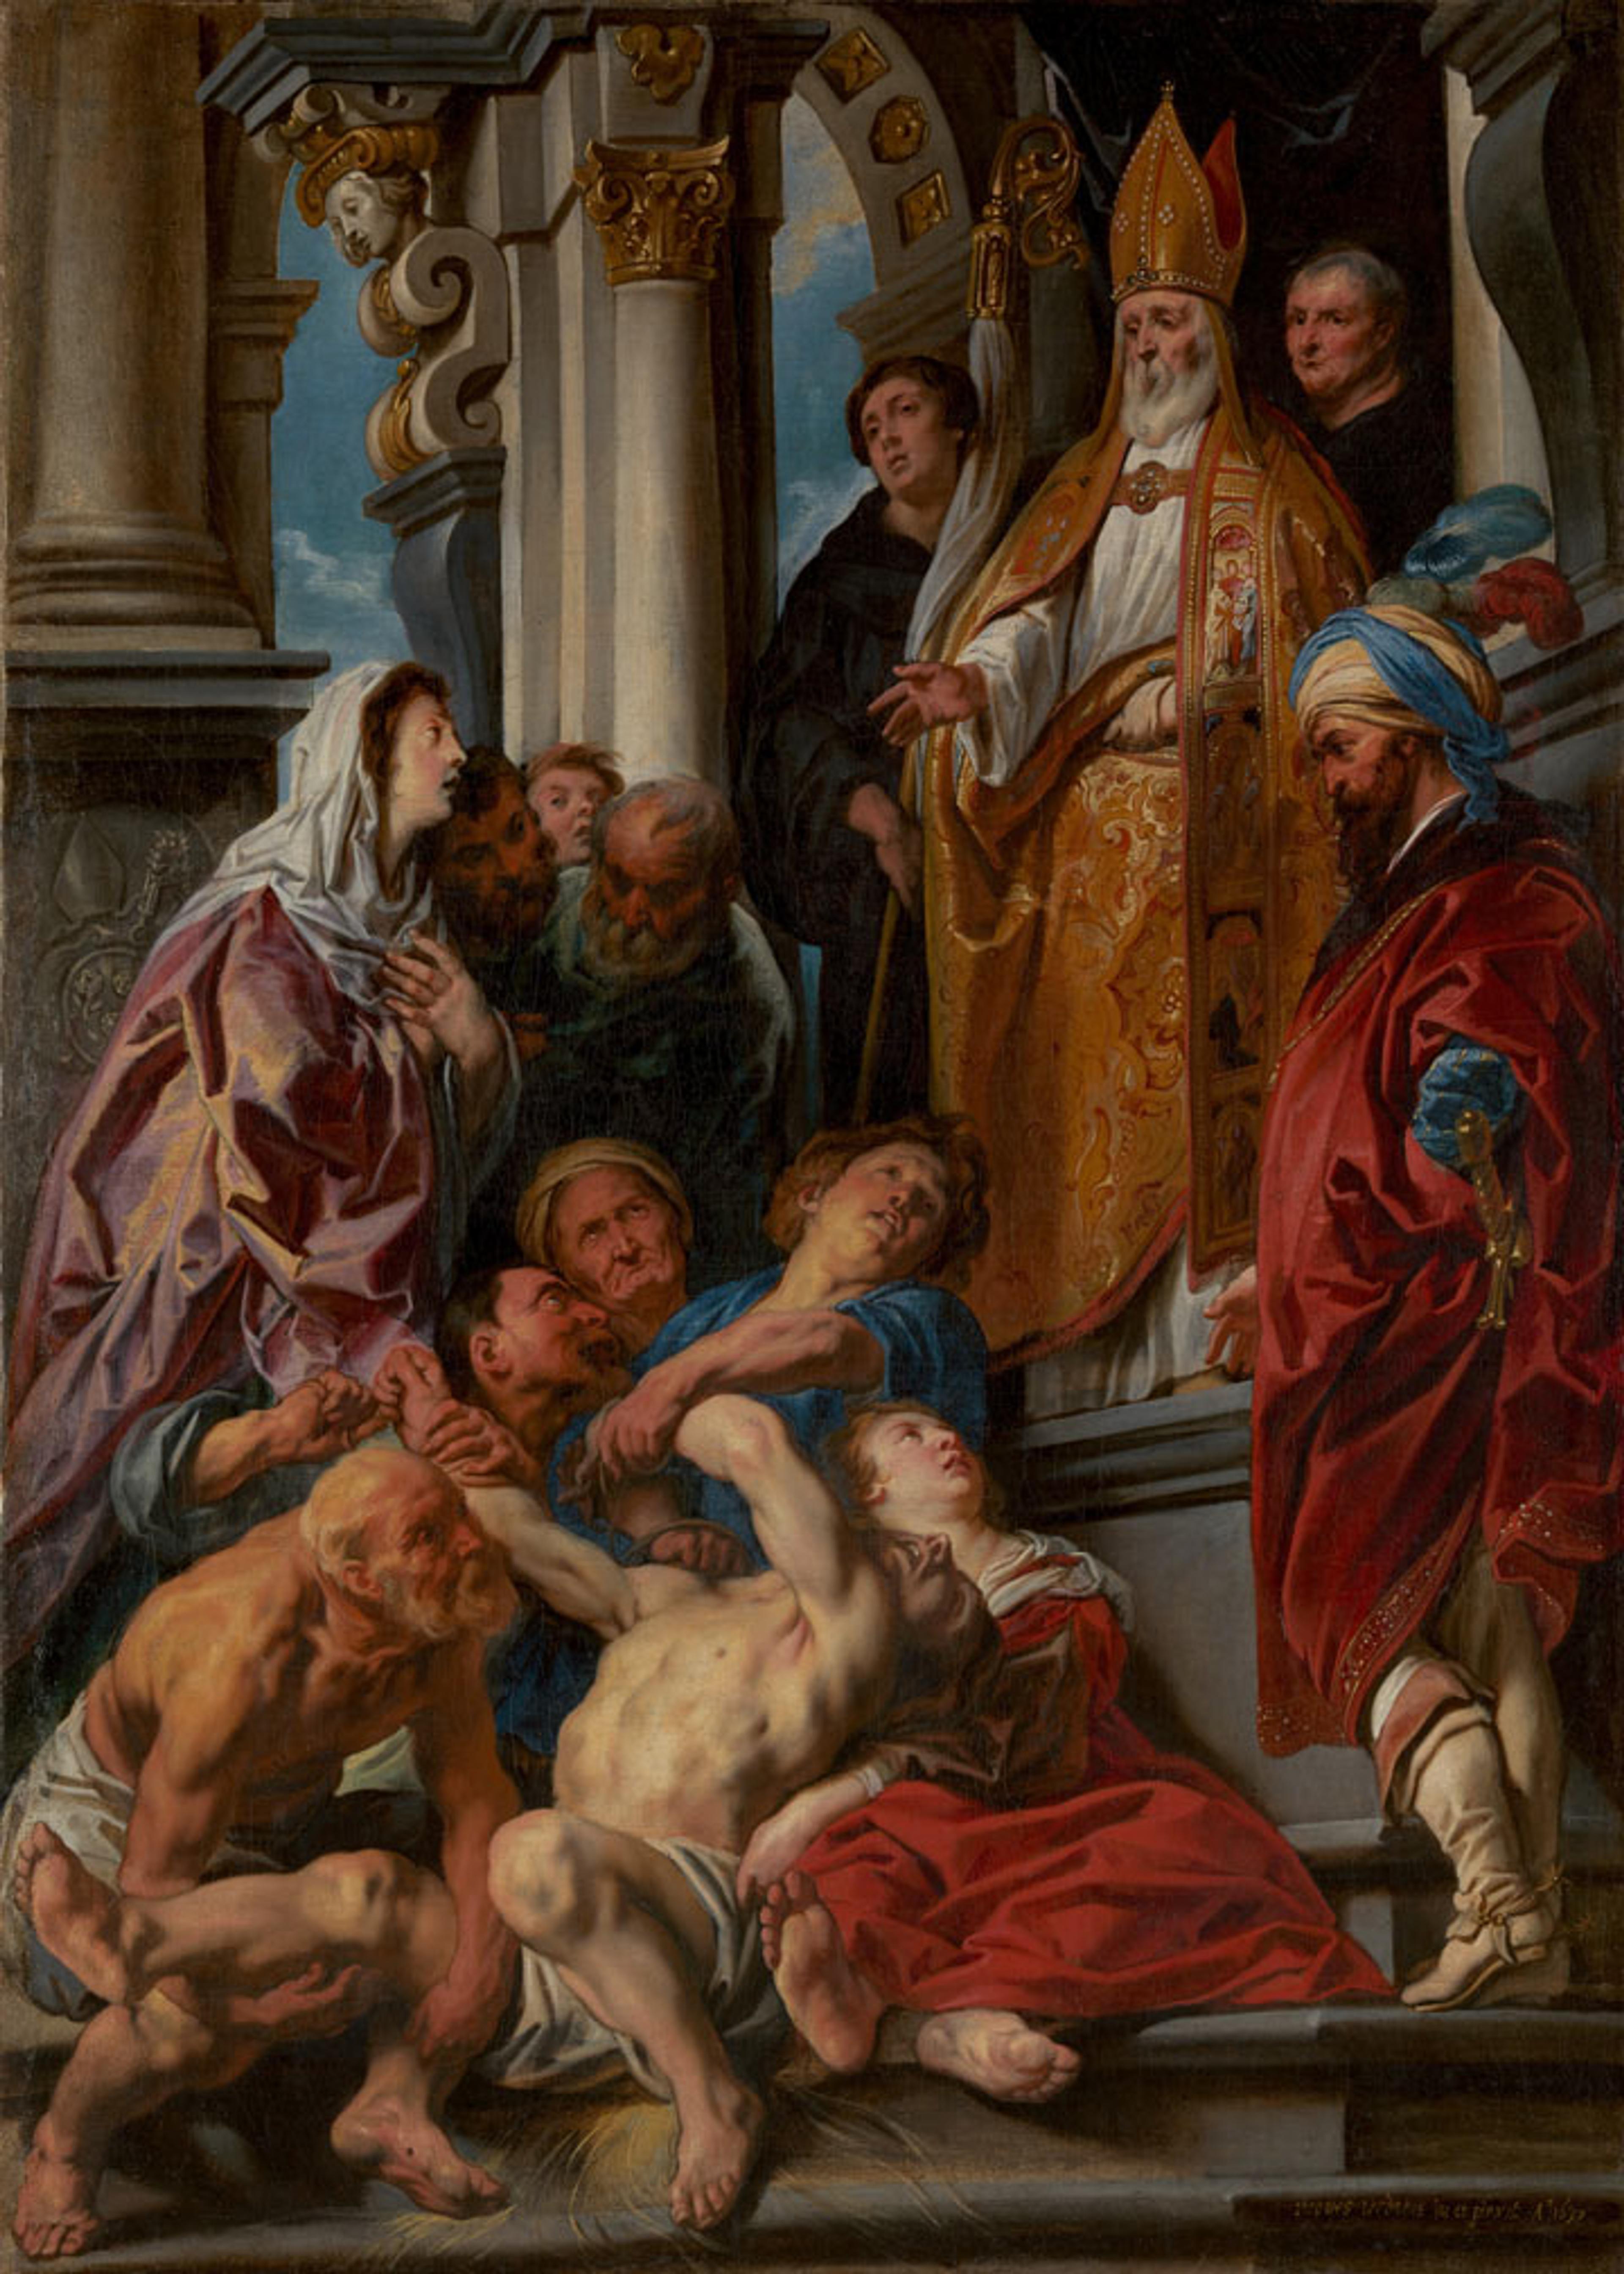 A monumental painting by an Old Master depicting Saint Martin healing a man while surrounded by a throng of onlookers